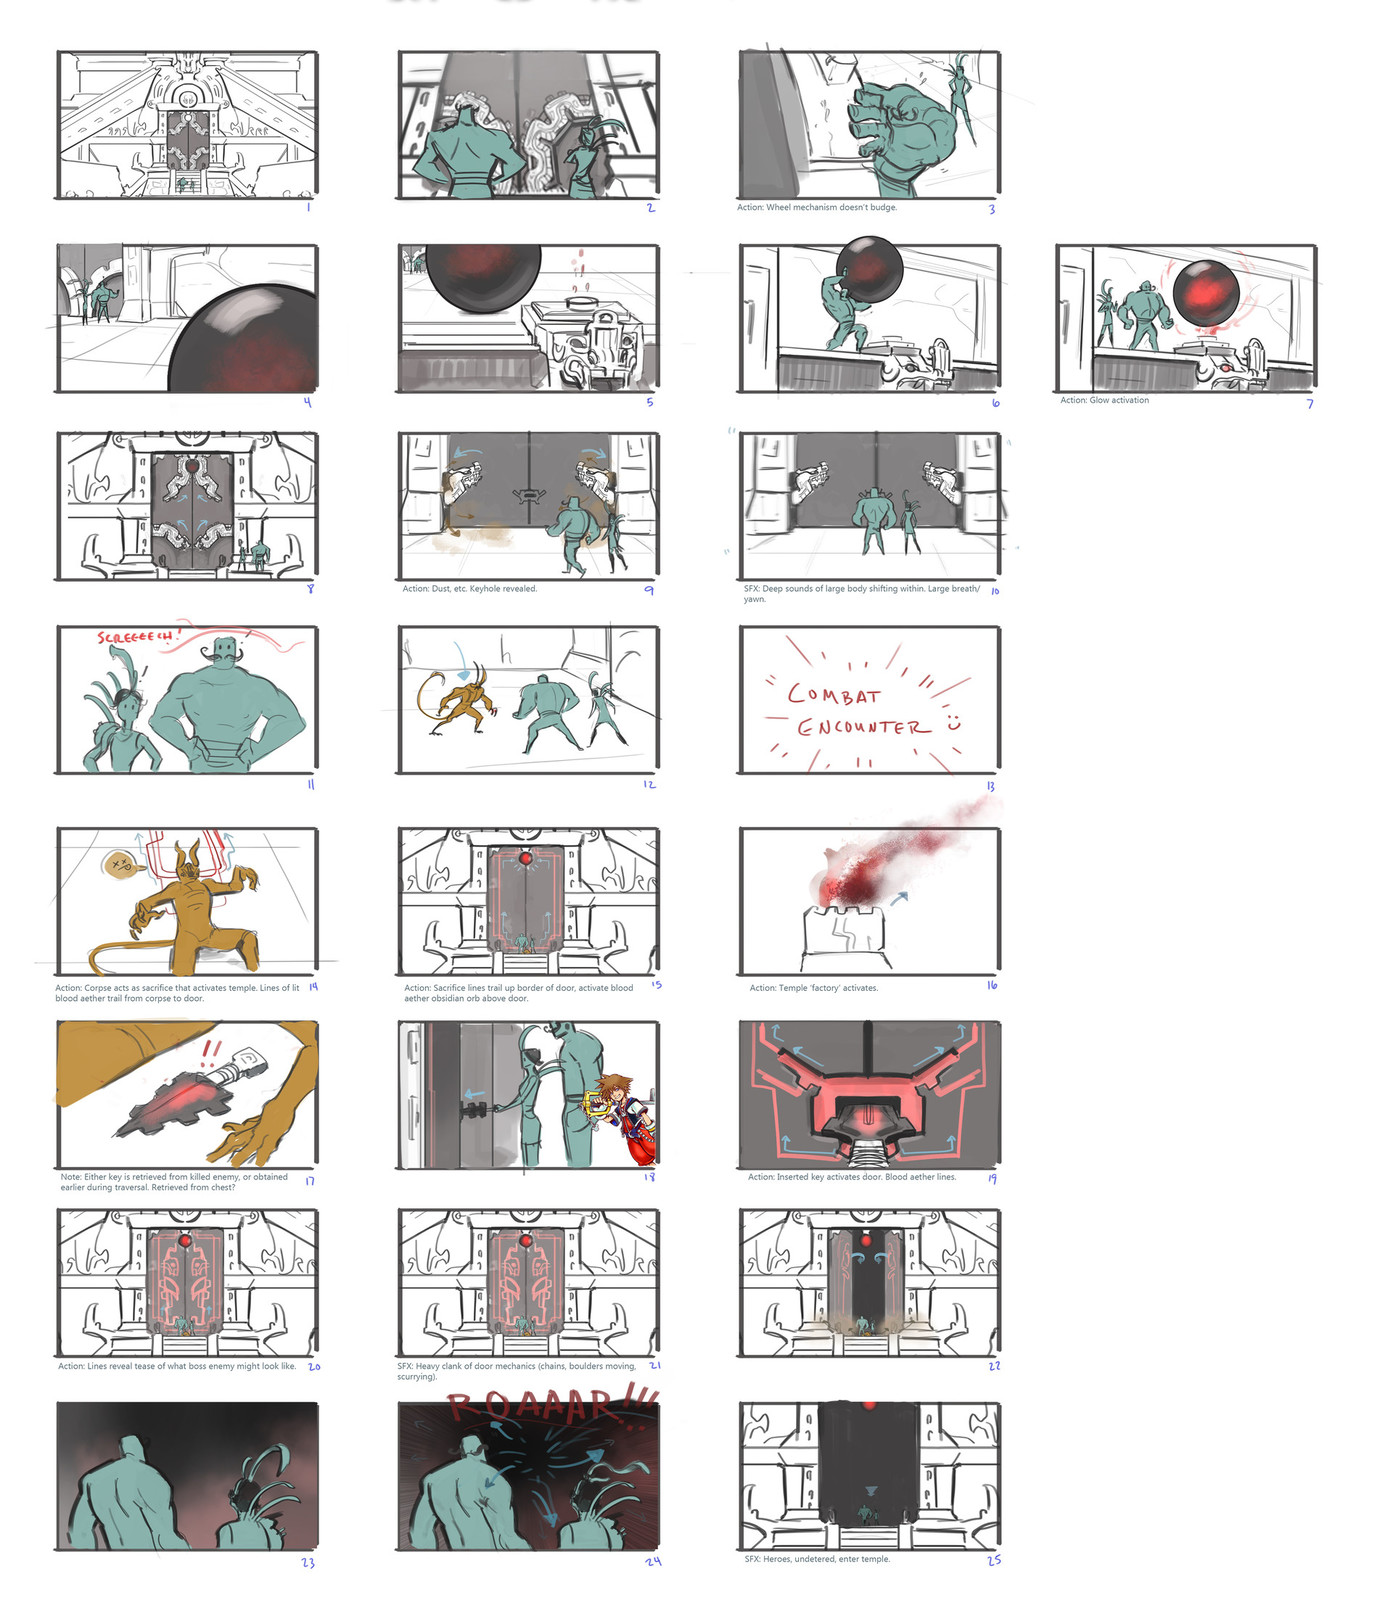 A quick 'n' dirty storyboard for opening a temple door. I overdid it a little with the process and eventually the entire scene was reduced to a quip between characters and simple key insertion. Still a very fun exploration!